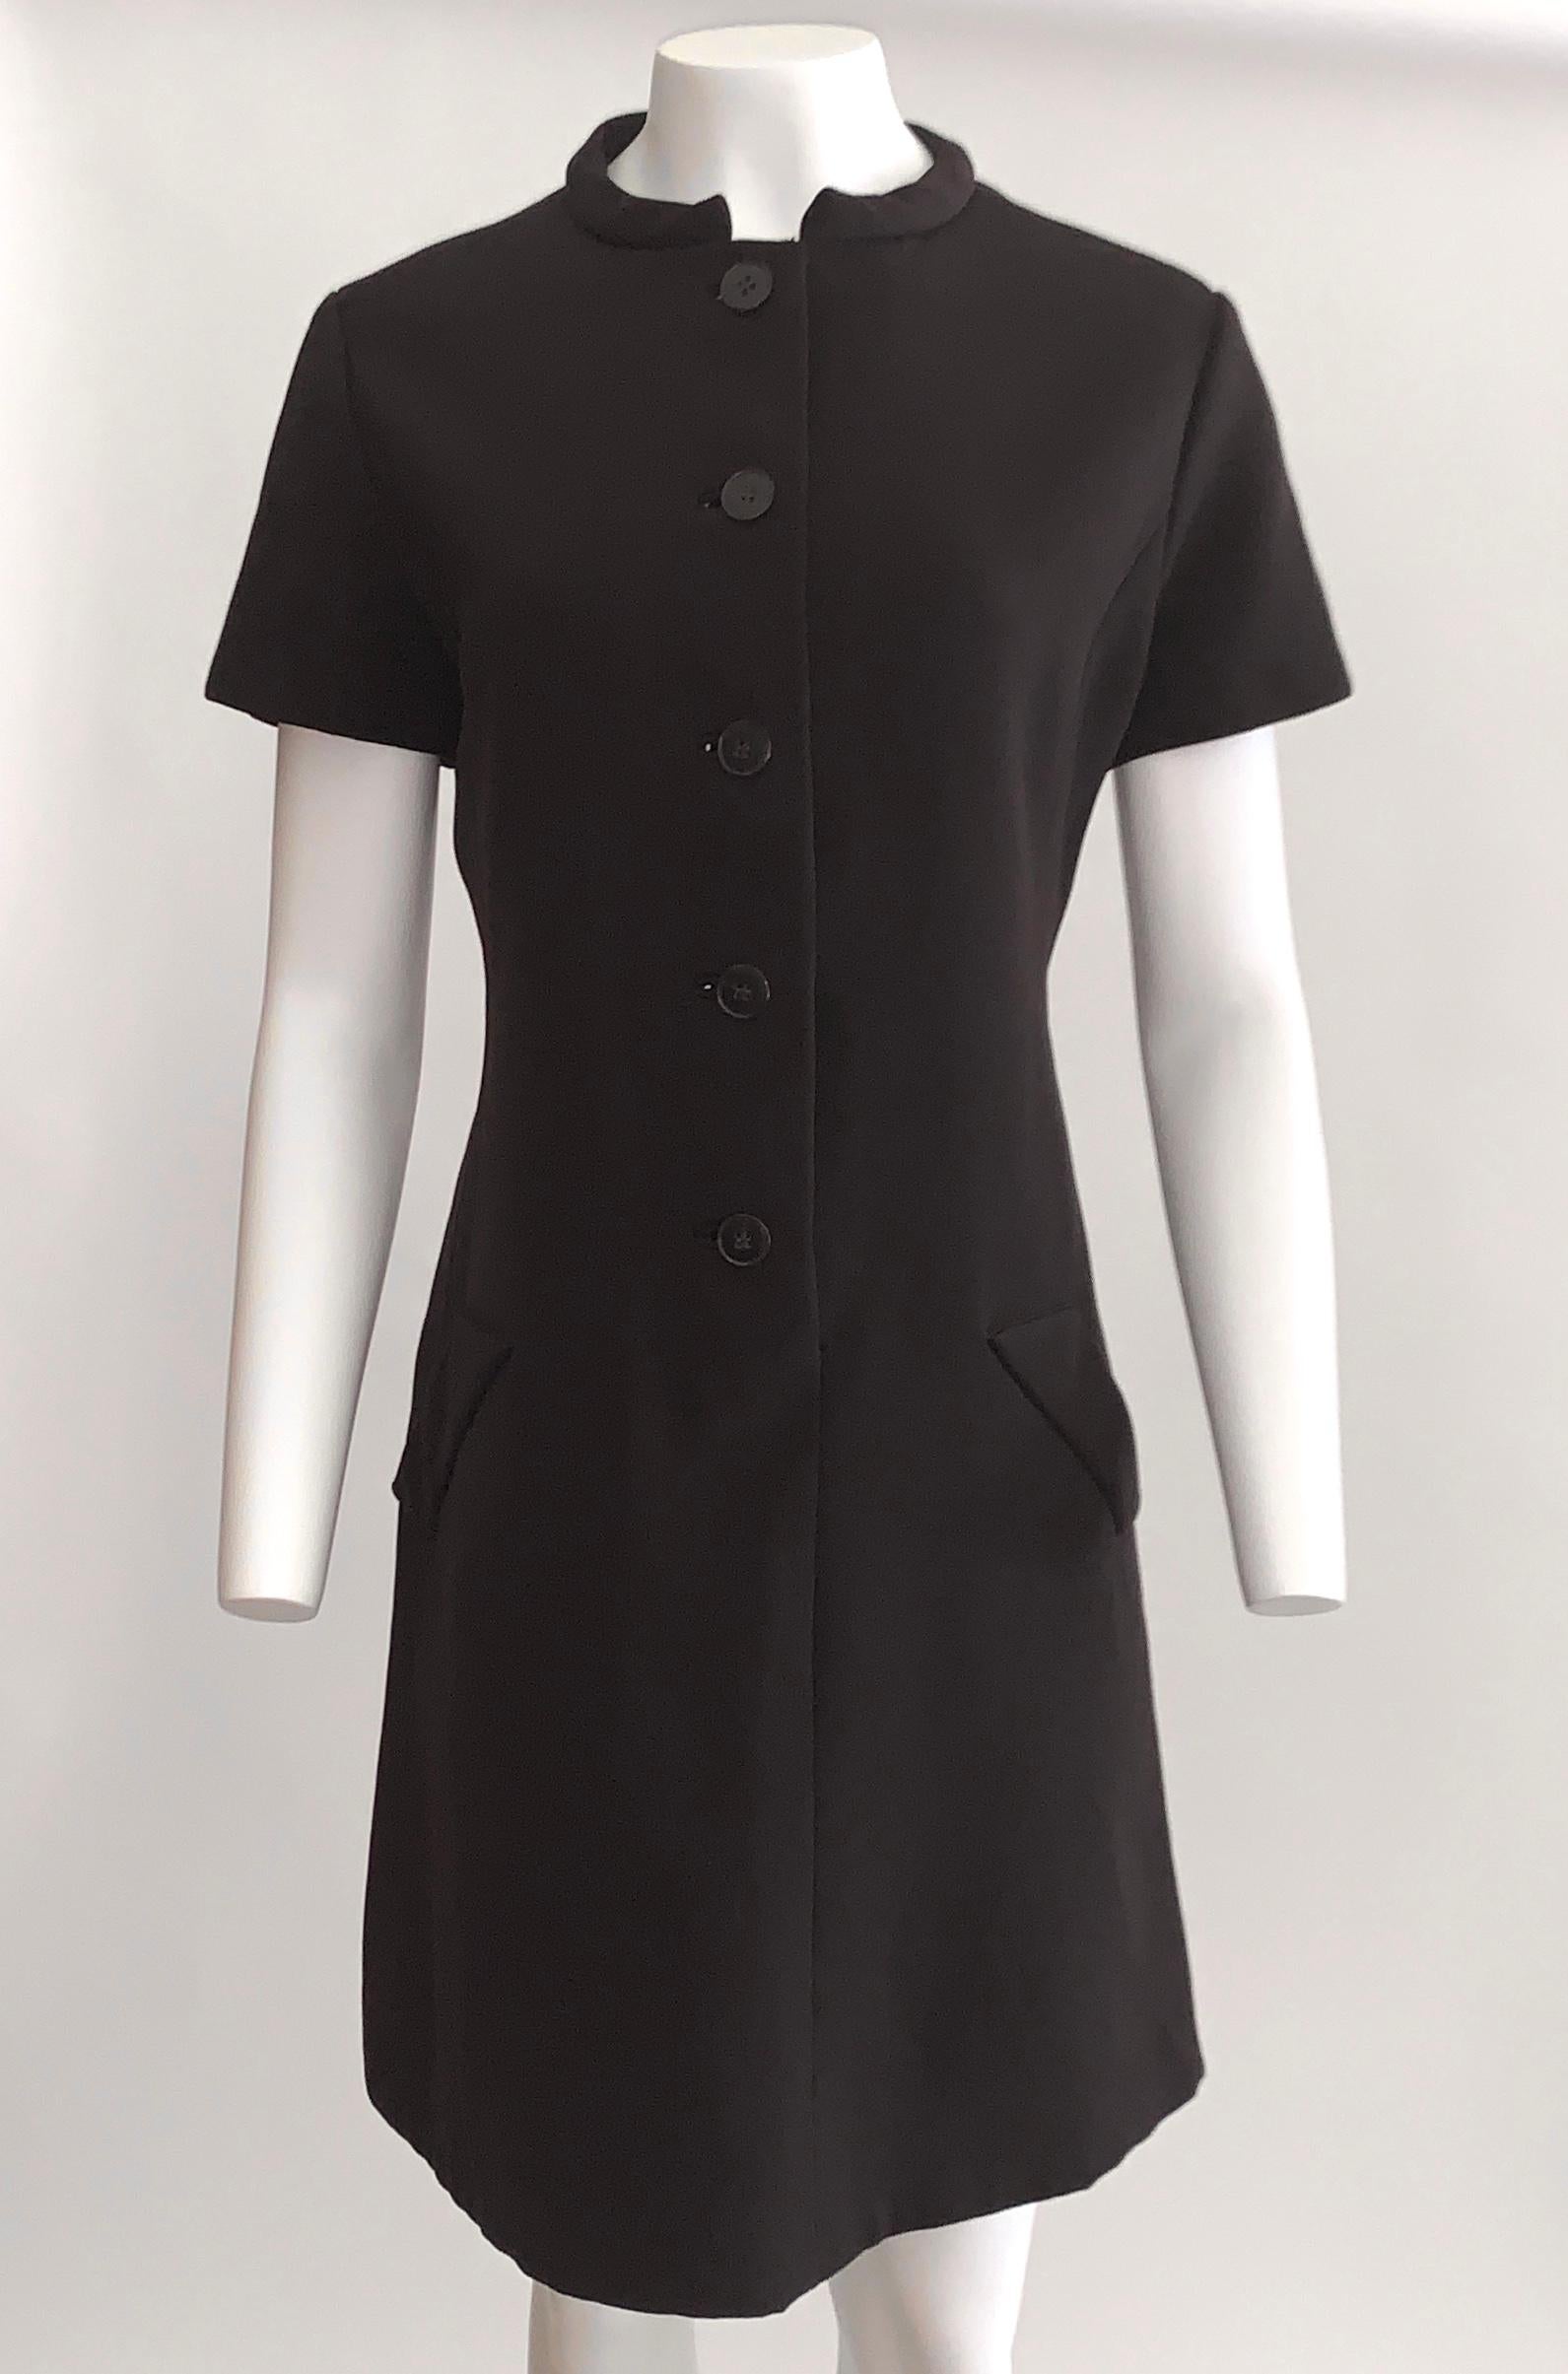 Geoffrey Beene vintage 1960s short sleeve dress with dark plastic tortoiseshell buttons . Faux front pocket detail. Front button closure.

No content label, feels like wool.
Fully lined in a silky fabric. 

No size label. Best fits a size L, see